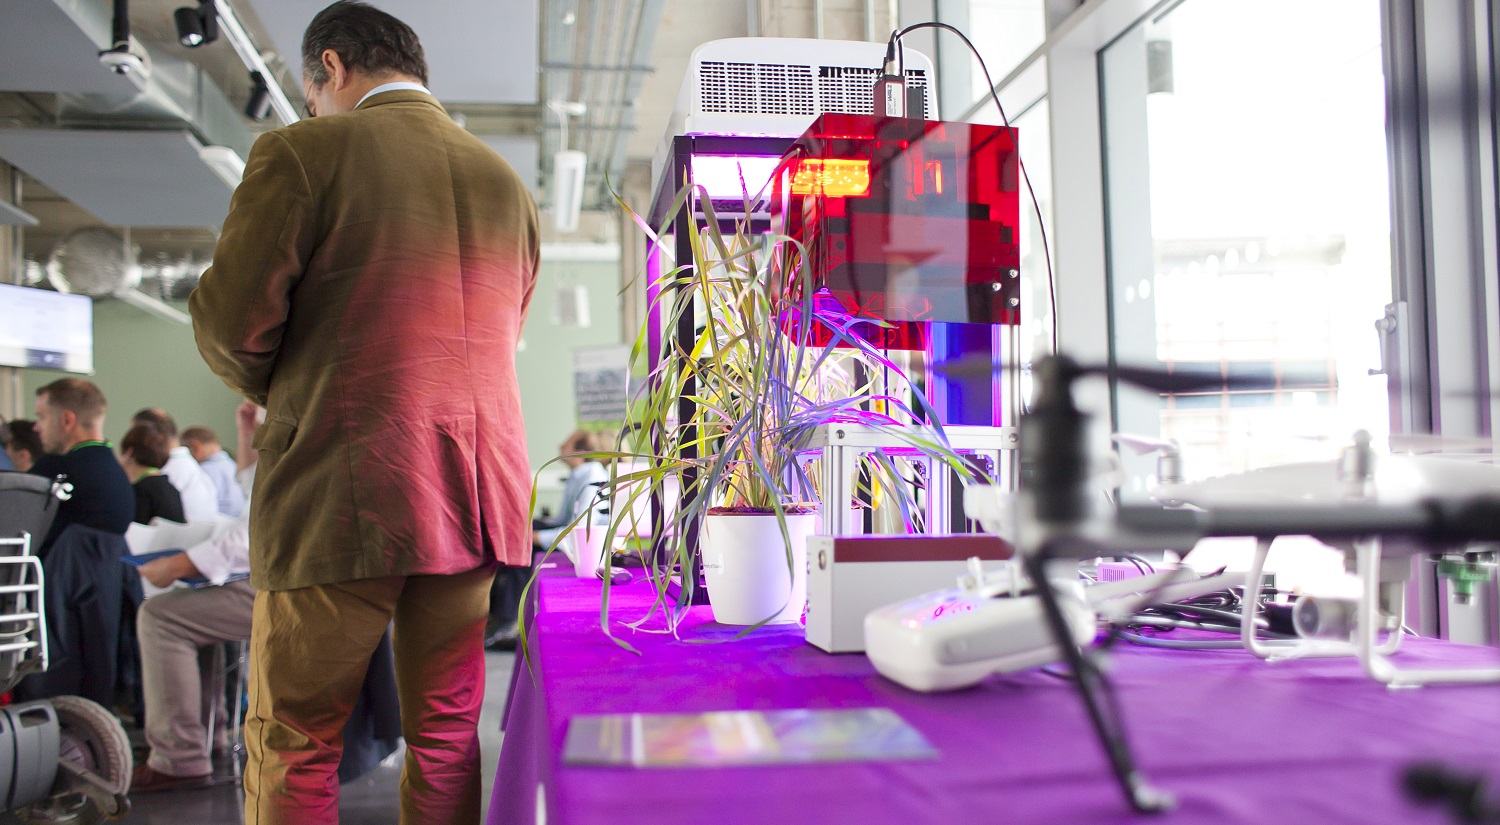 The launch event was an ideal opportunity for us to showcase some of the technology we use in our plant productivity research.